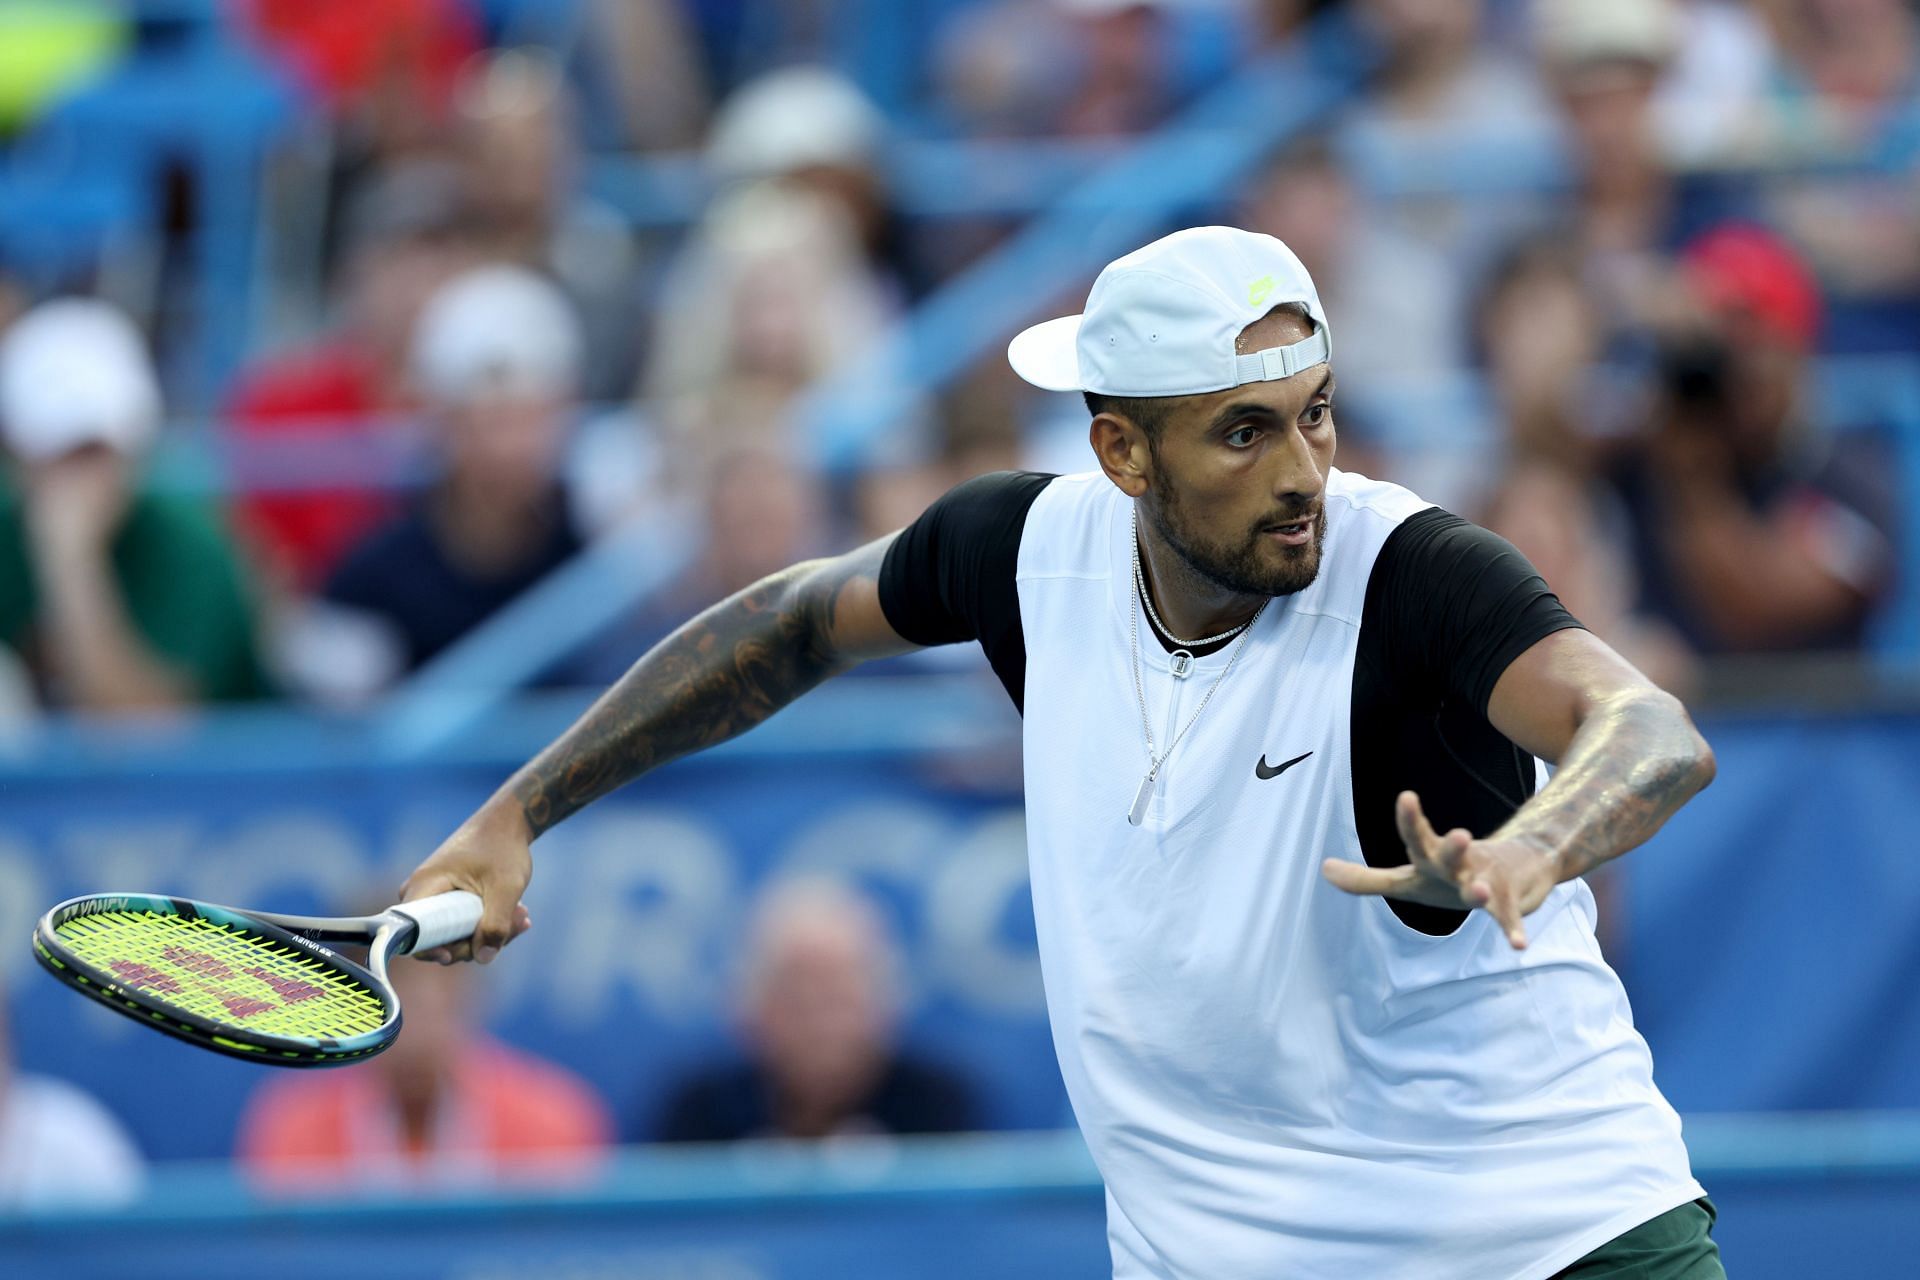 Nick Kyrgios prepares to take a forehand against Marcos Giron in their first round match in Washington